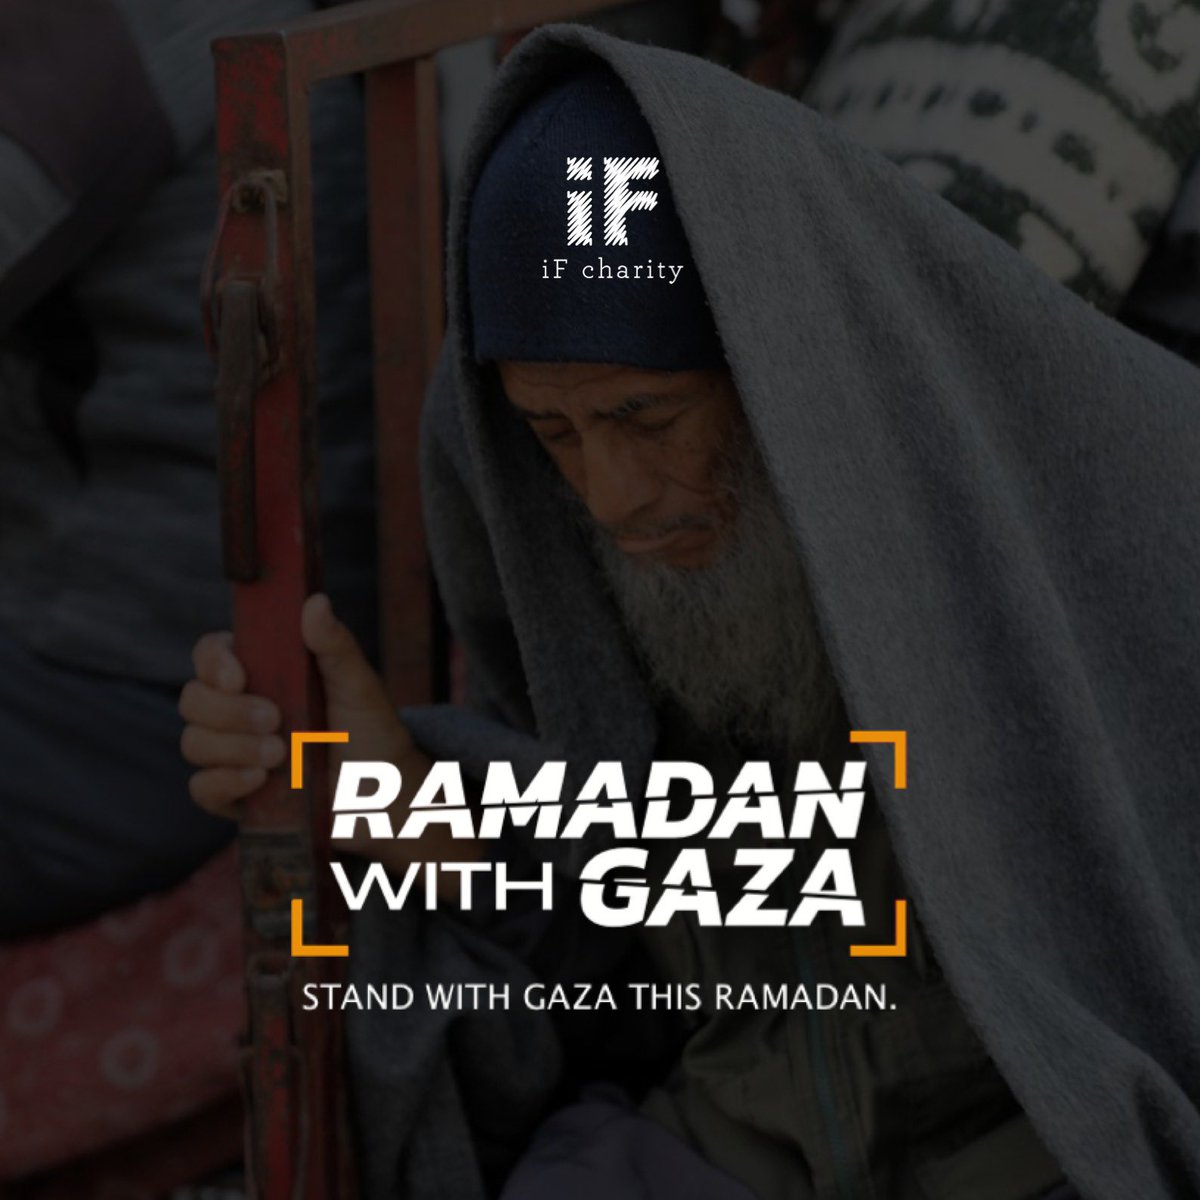 As we have entered the last days of Ramadan, let’s turn our attention to Gaza and stand in solidarity with our brothers and sisters facing immense challenges.

Together, we can bring hope and relief to Gaza.

@iFCharityUK
muslimgiving.org/RamadanWithGaza
#RamadanForGaza #SupportGaza